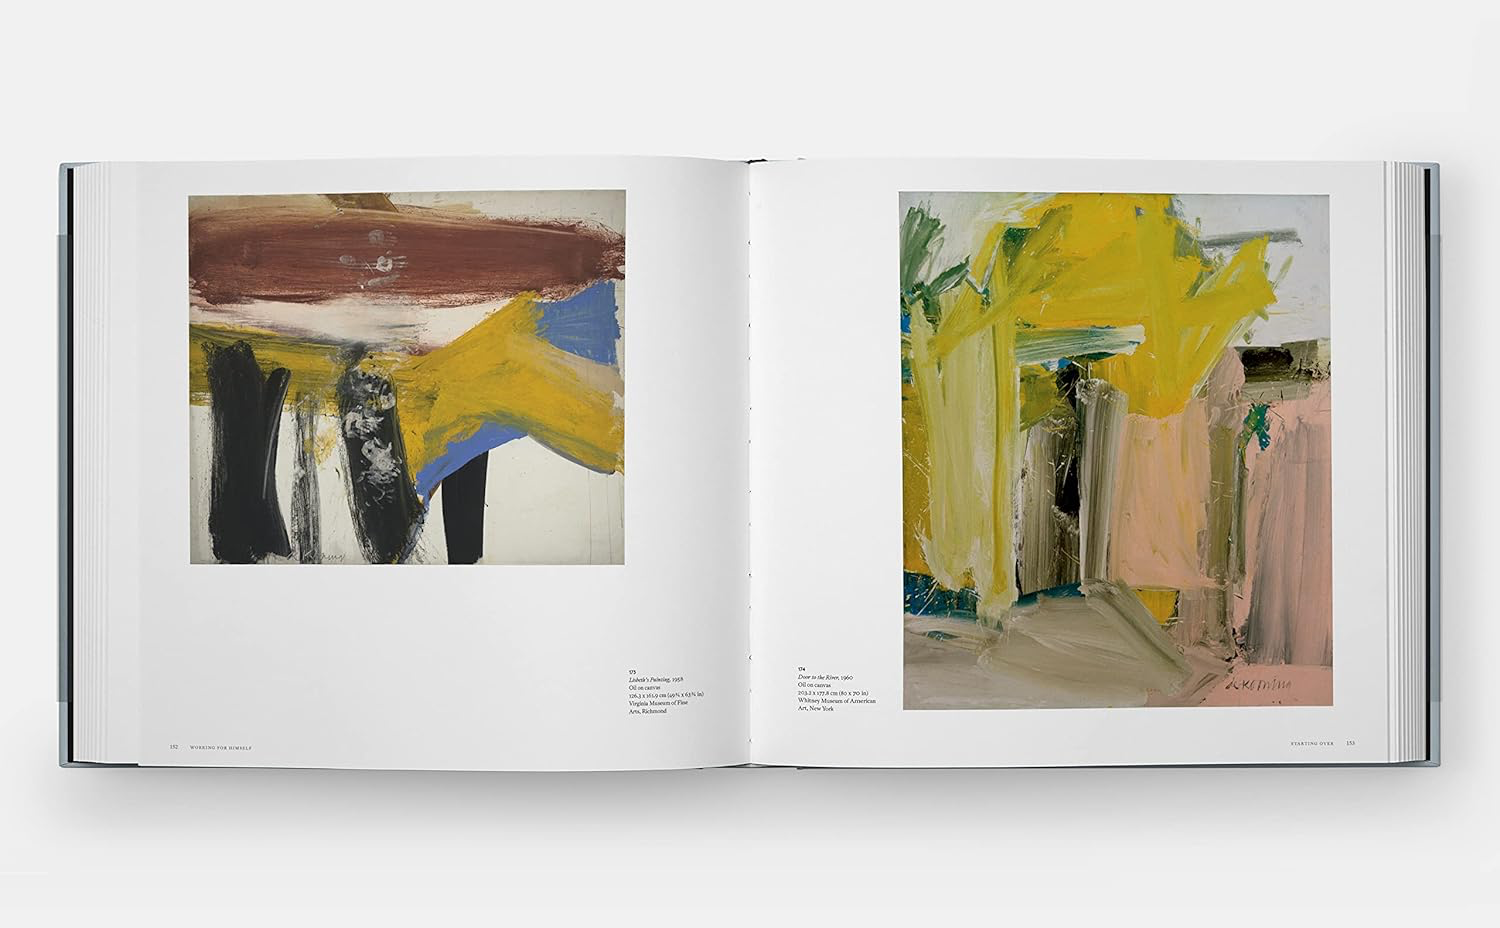 “A Way of Living: The Art of Willem de Kooning” Pages 152 and 153